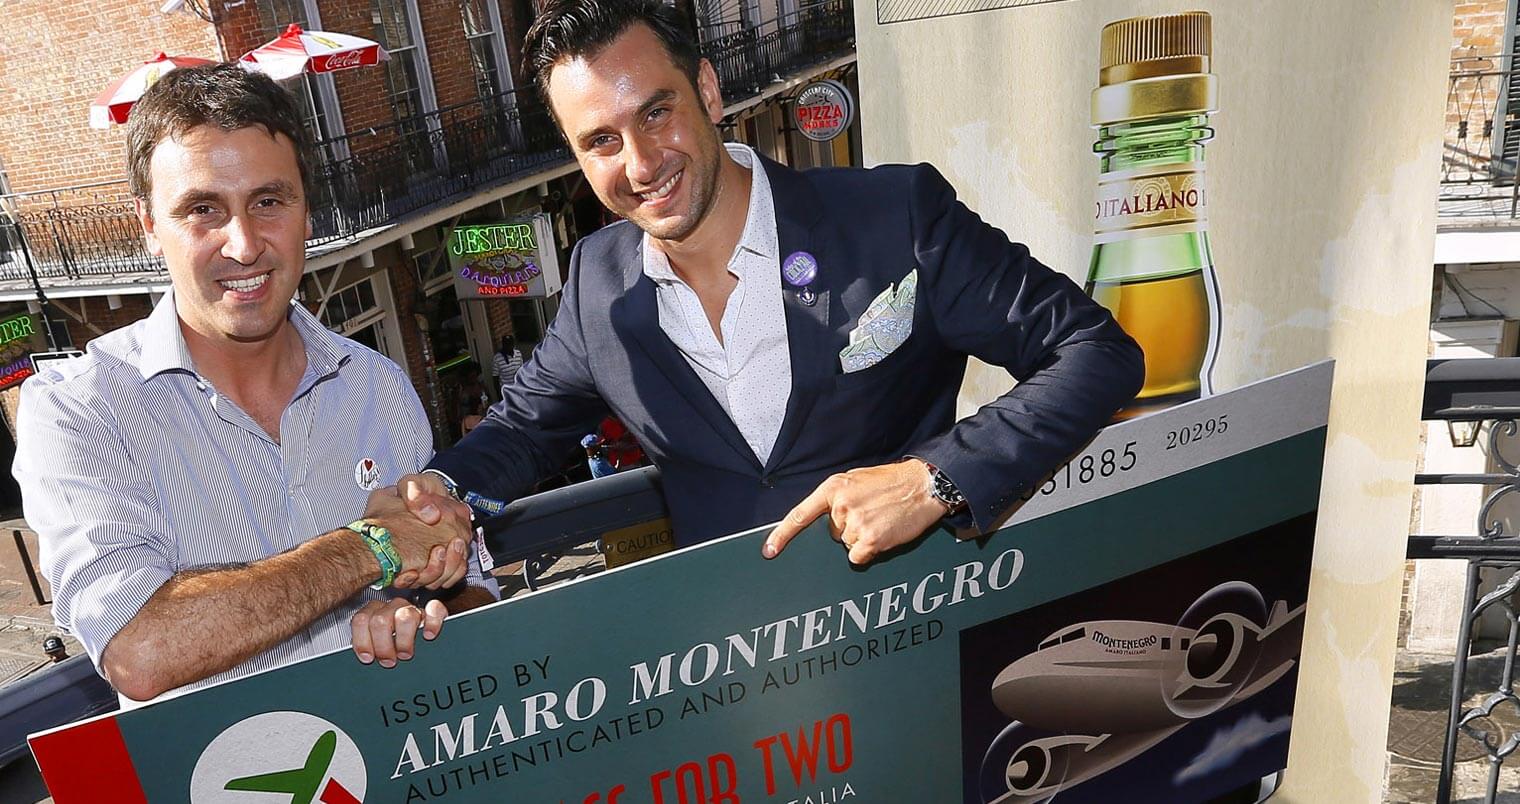 Amaro Montenegro Crowns 'Montenegro a Colazione' as its 2016 Signature Cocktail, featured image